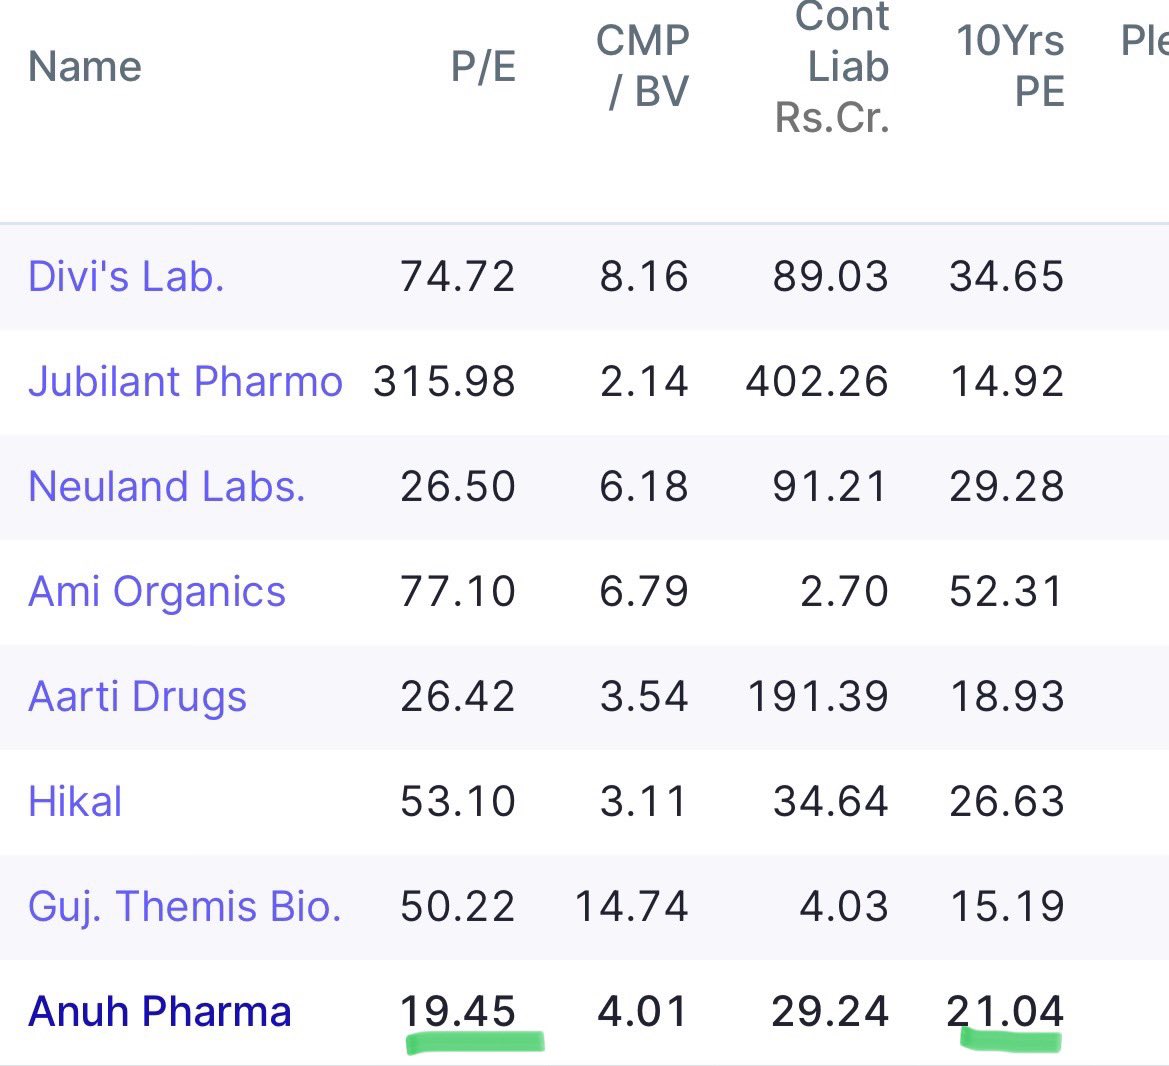 Added Anuh pharma at LC after fantastic results. Such a fantastic debt free company with high dividend payout Trading still below 10 years AvG PE . #anuhphrama